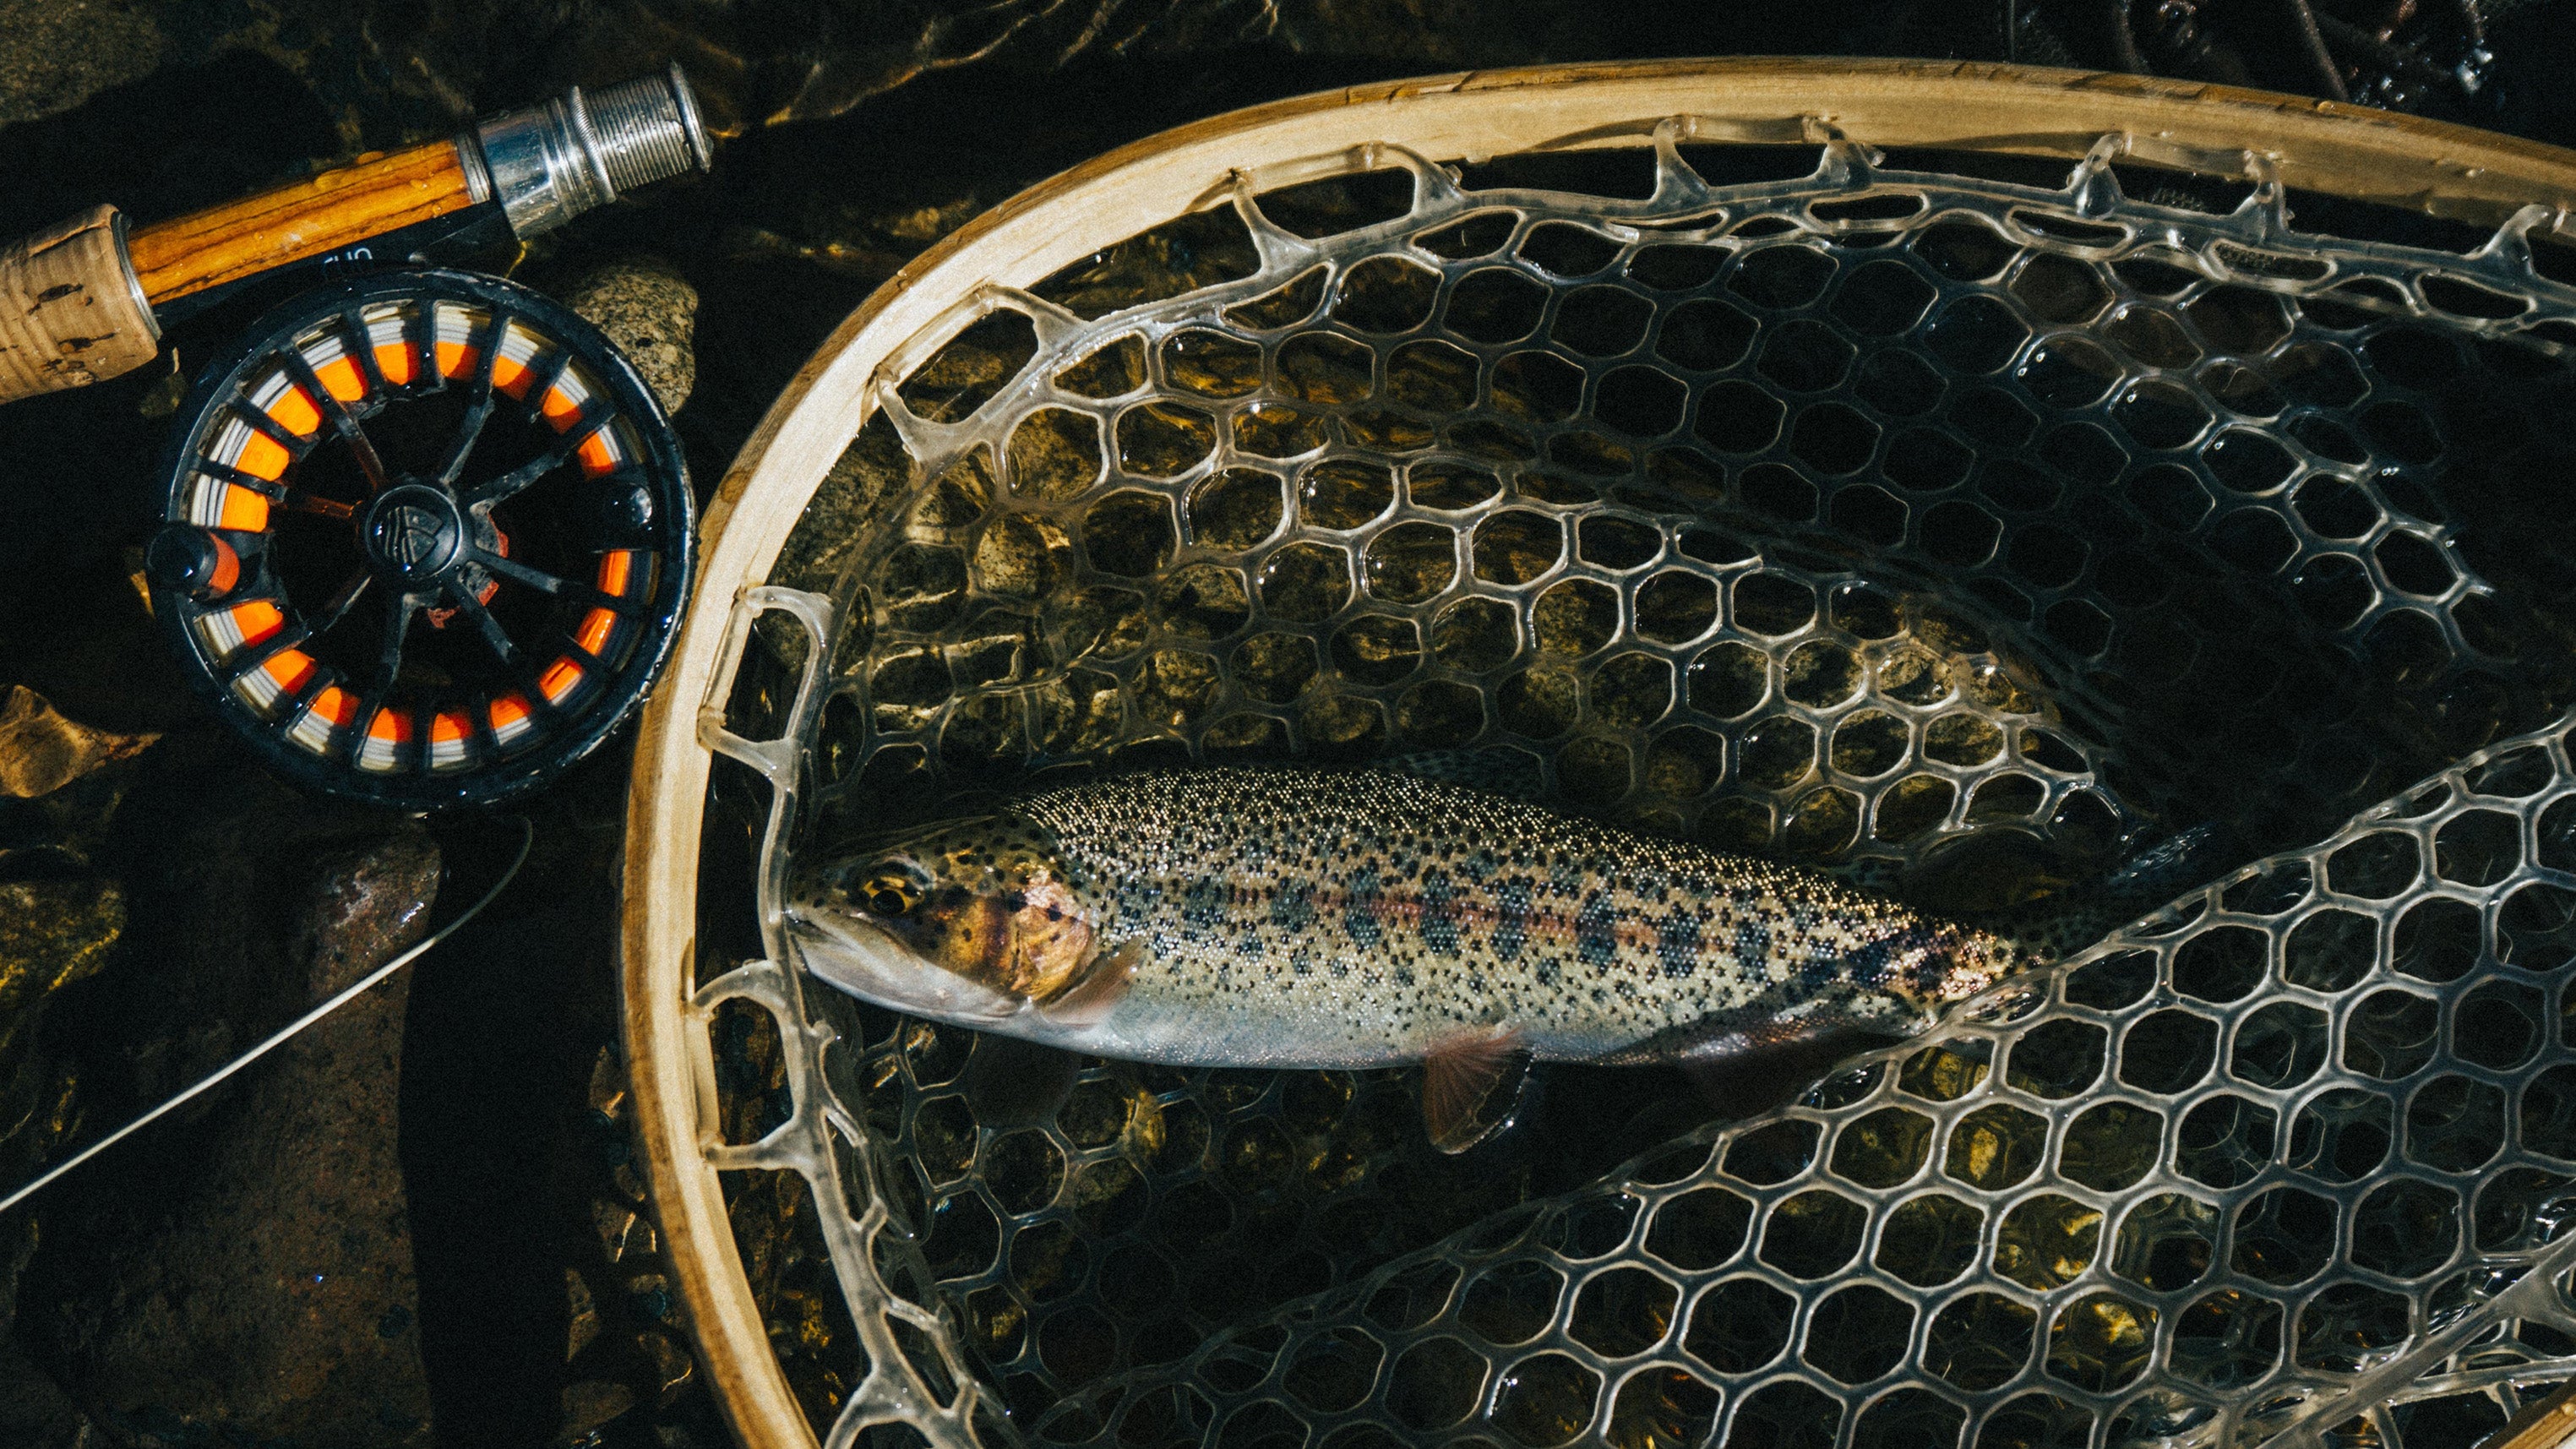 A beginner's guide to fly fishing